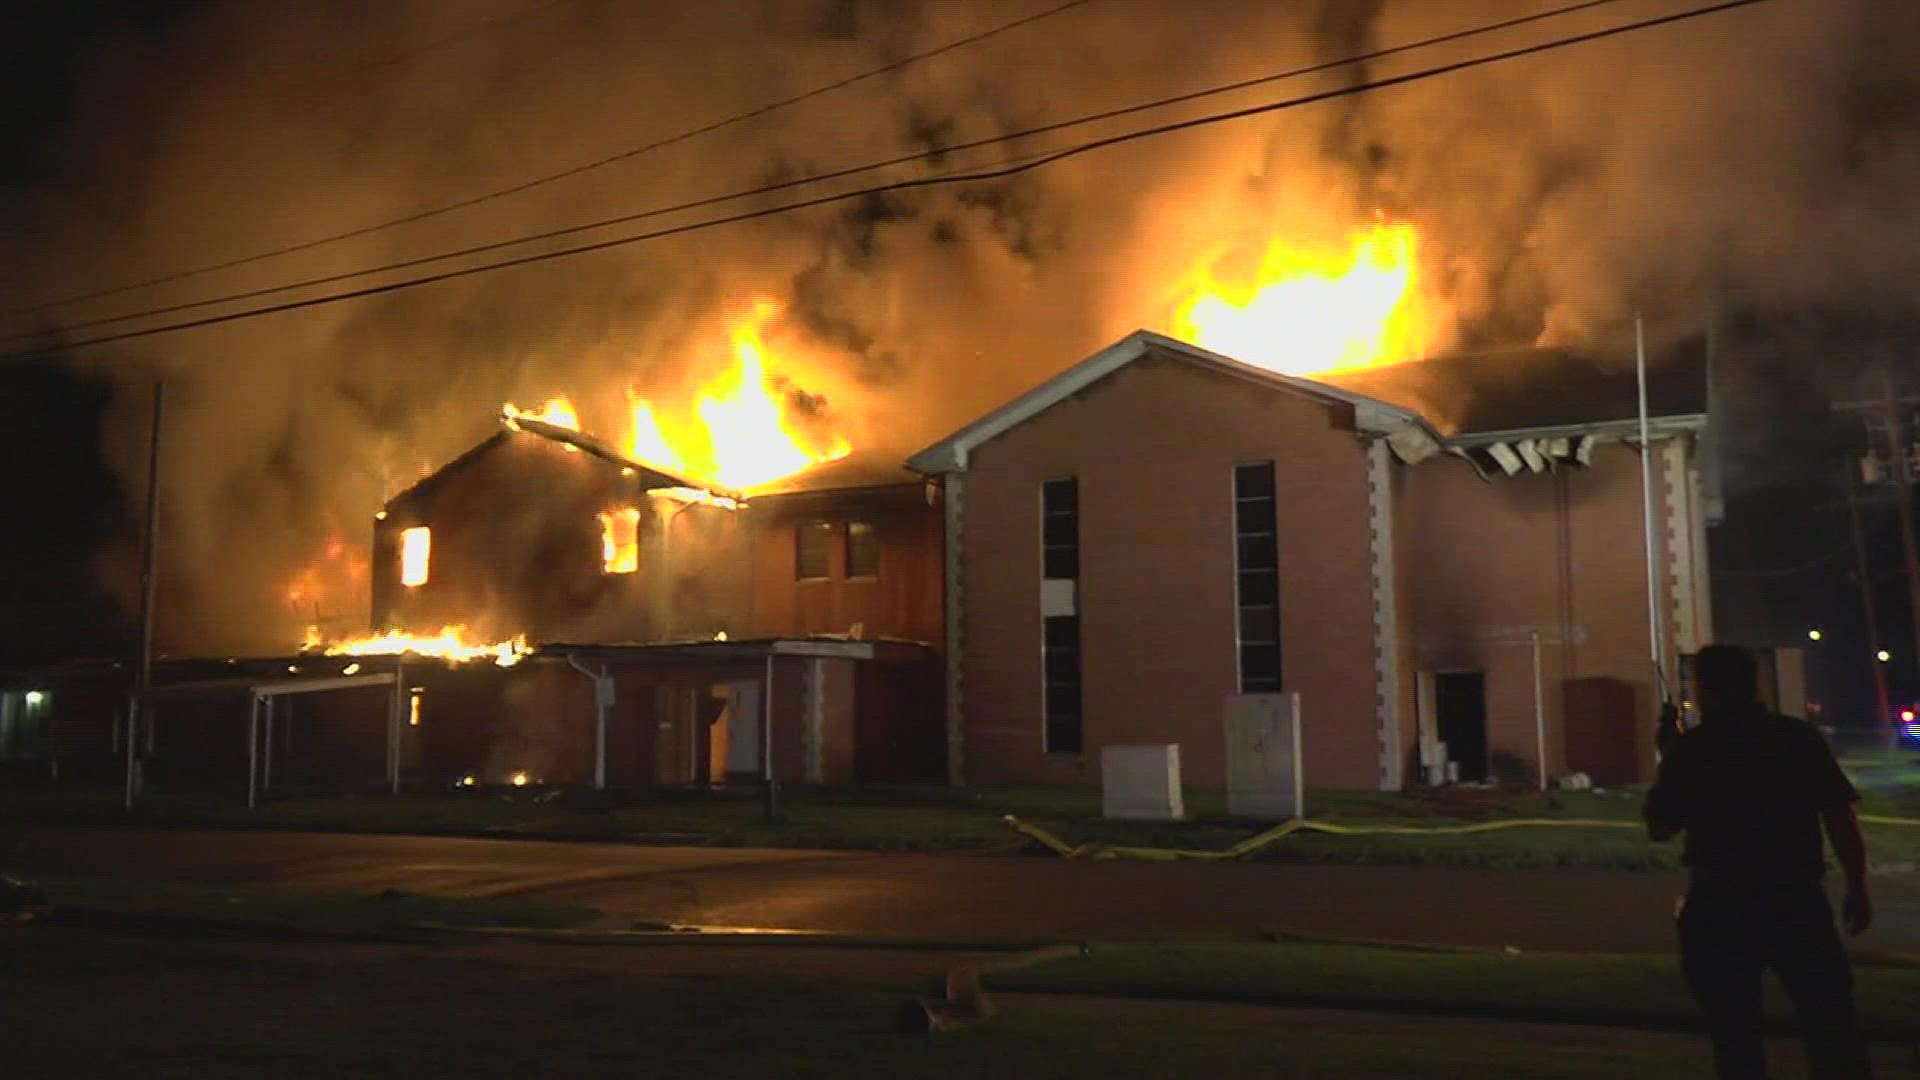 Officials have determined that work being done on an air conditioning unit is what led to a fire that devastated a Beaumont church.